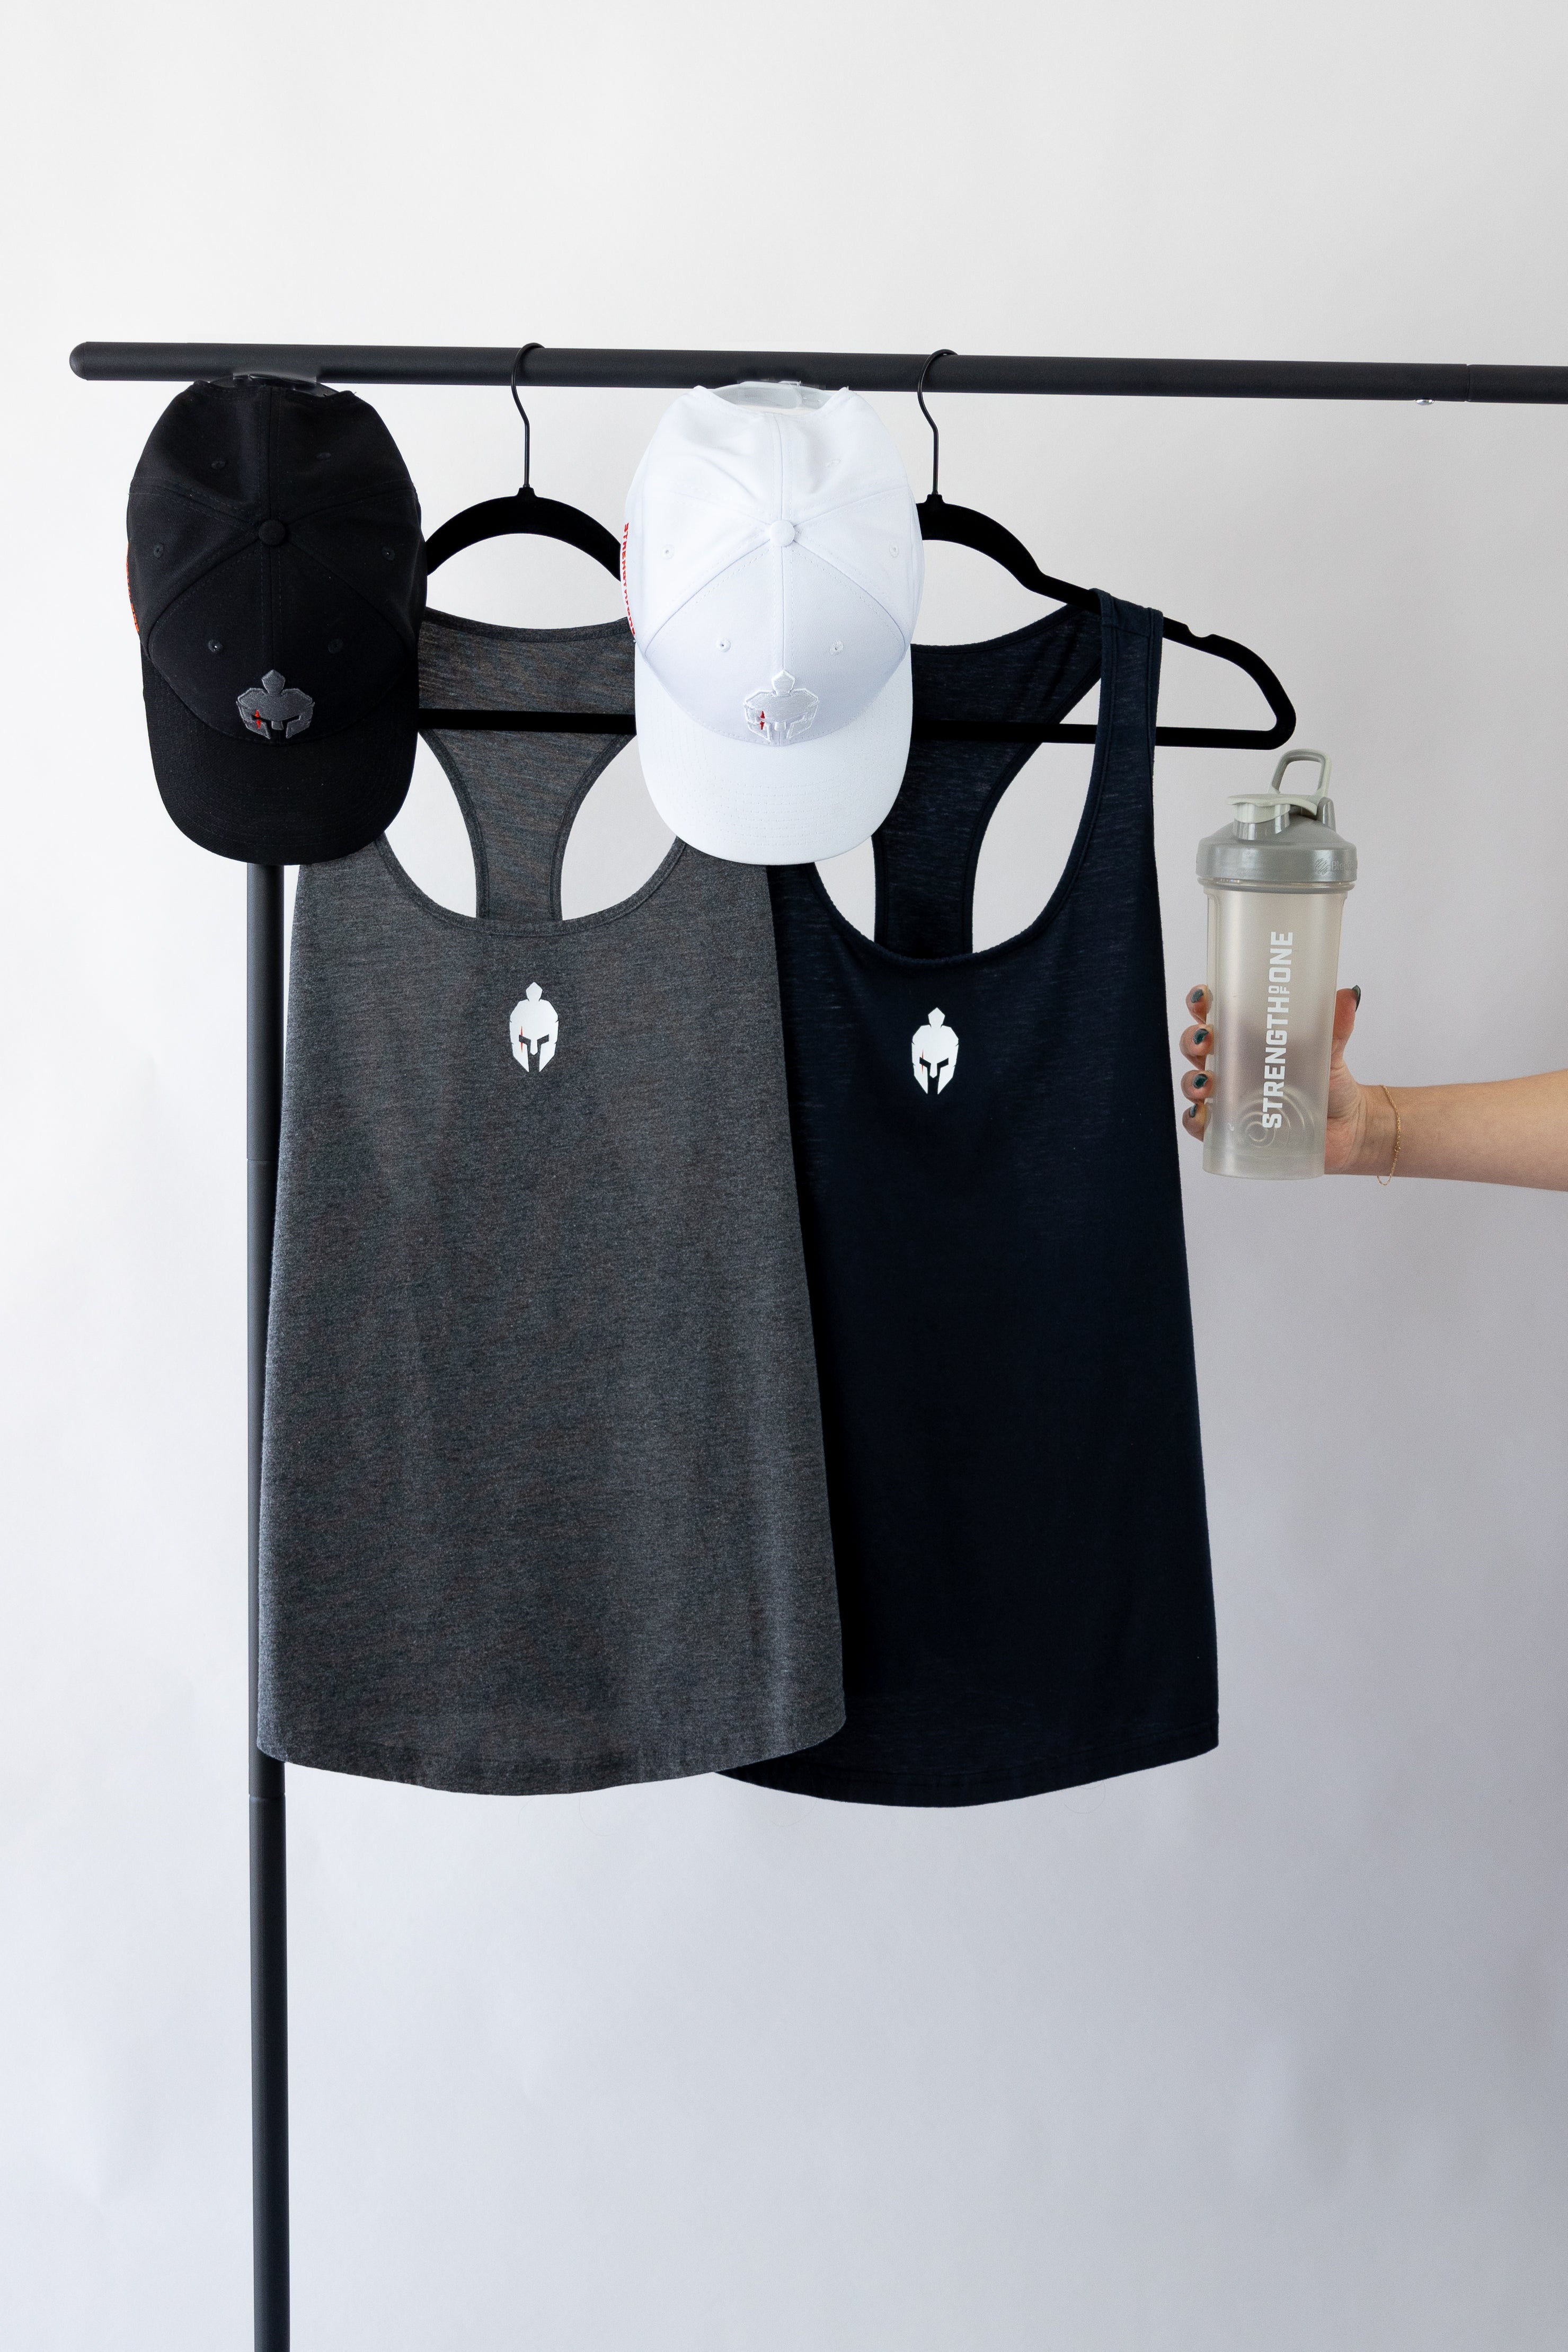 Two Strength of One workout stringers, two Strength of One hats, and Strength of One Blender Bottle hanging on a clothing rack